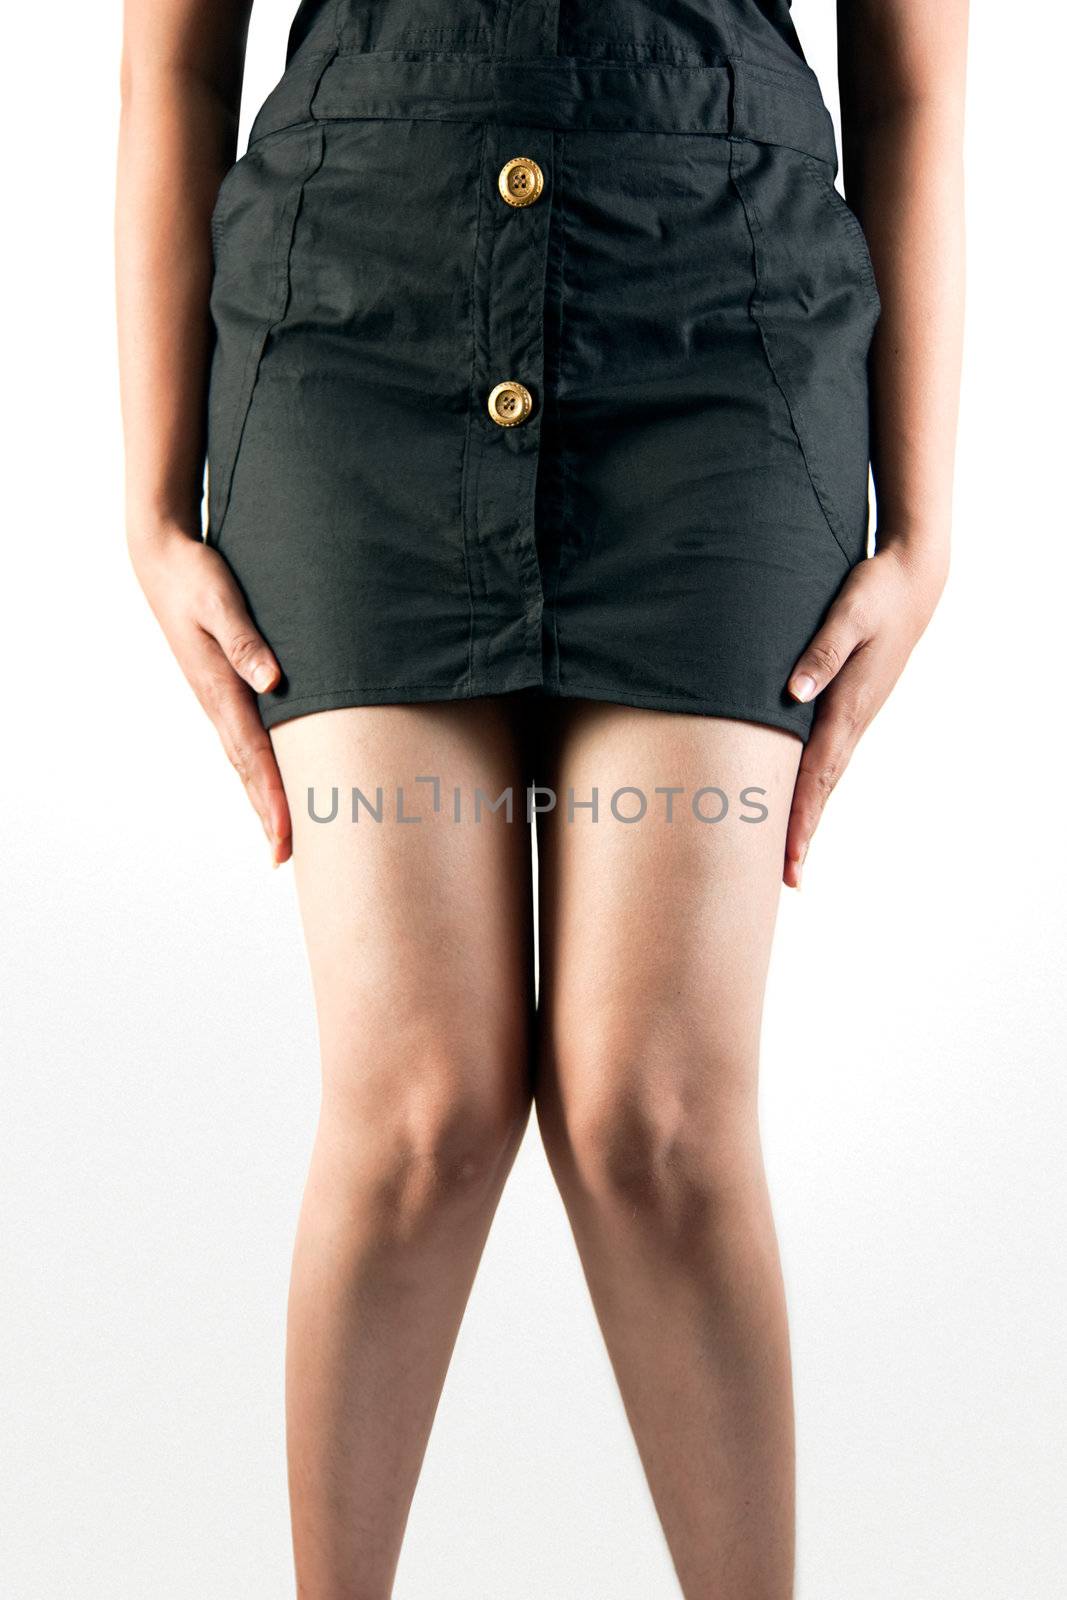 Closeup picture of woman hiding something between her legs